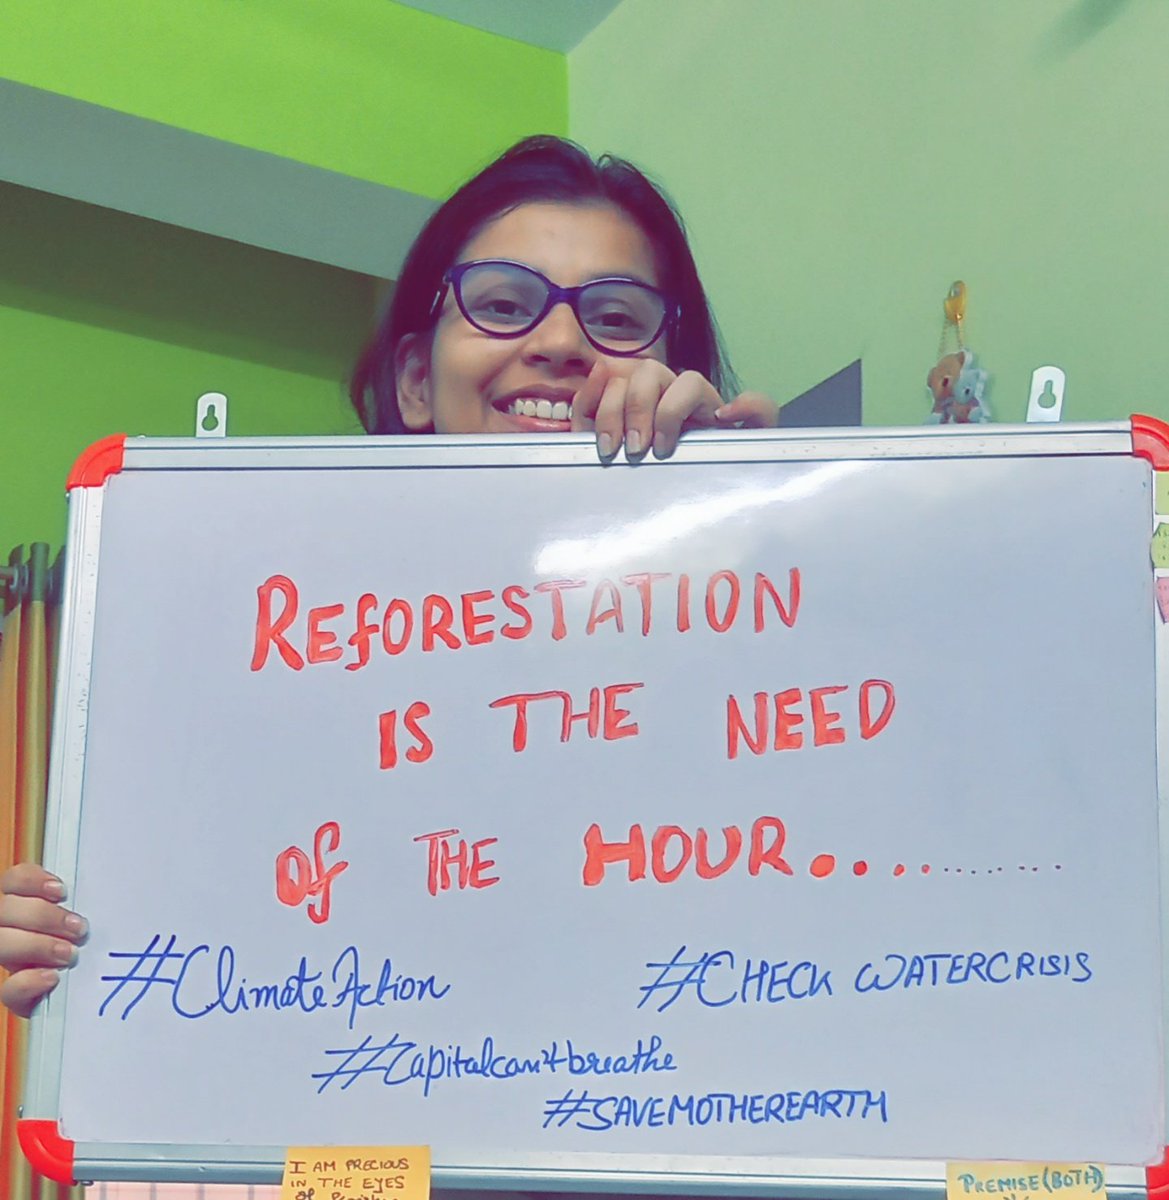 That's where I wrote Reforestation is the need and not Deforestation, I dedicate my 7th week of #ClimateStrikeOnline to this cause.
#SaveBuxwahaForest 
#FridaysForFuture 
#ClimateActionNow 
#ClimateEmergency